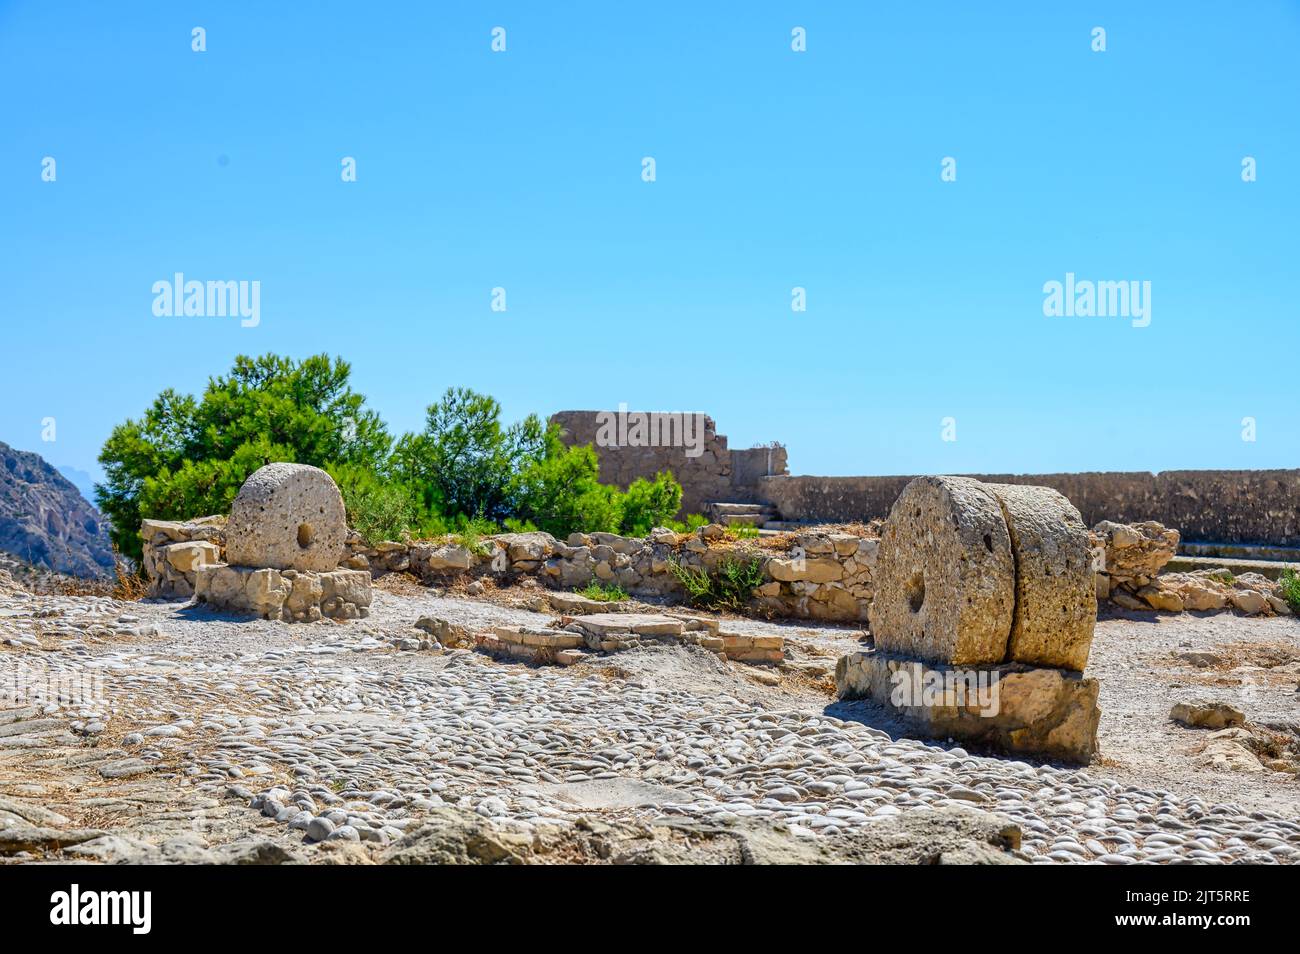 Stone wheels which are remains of an old bakery. The ruined medieval fort is a major tourist attraction in the Spanish city. Stock Photo